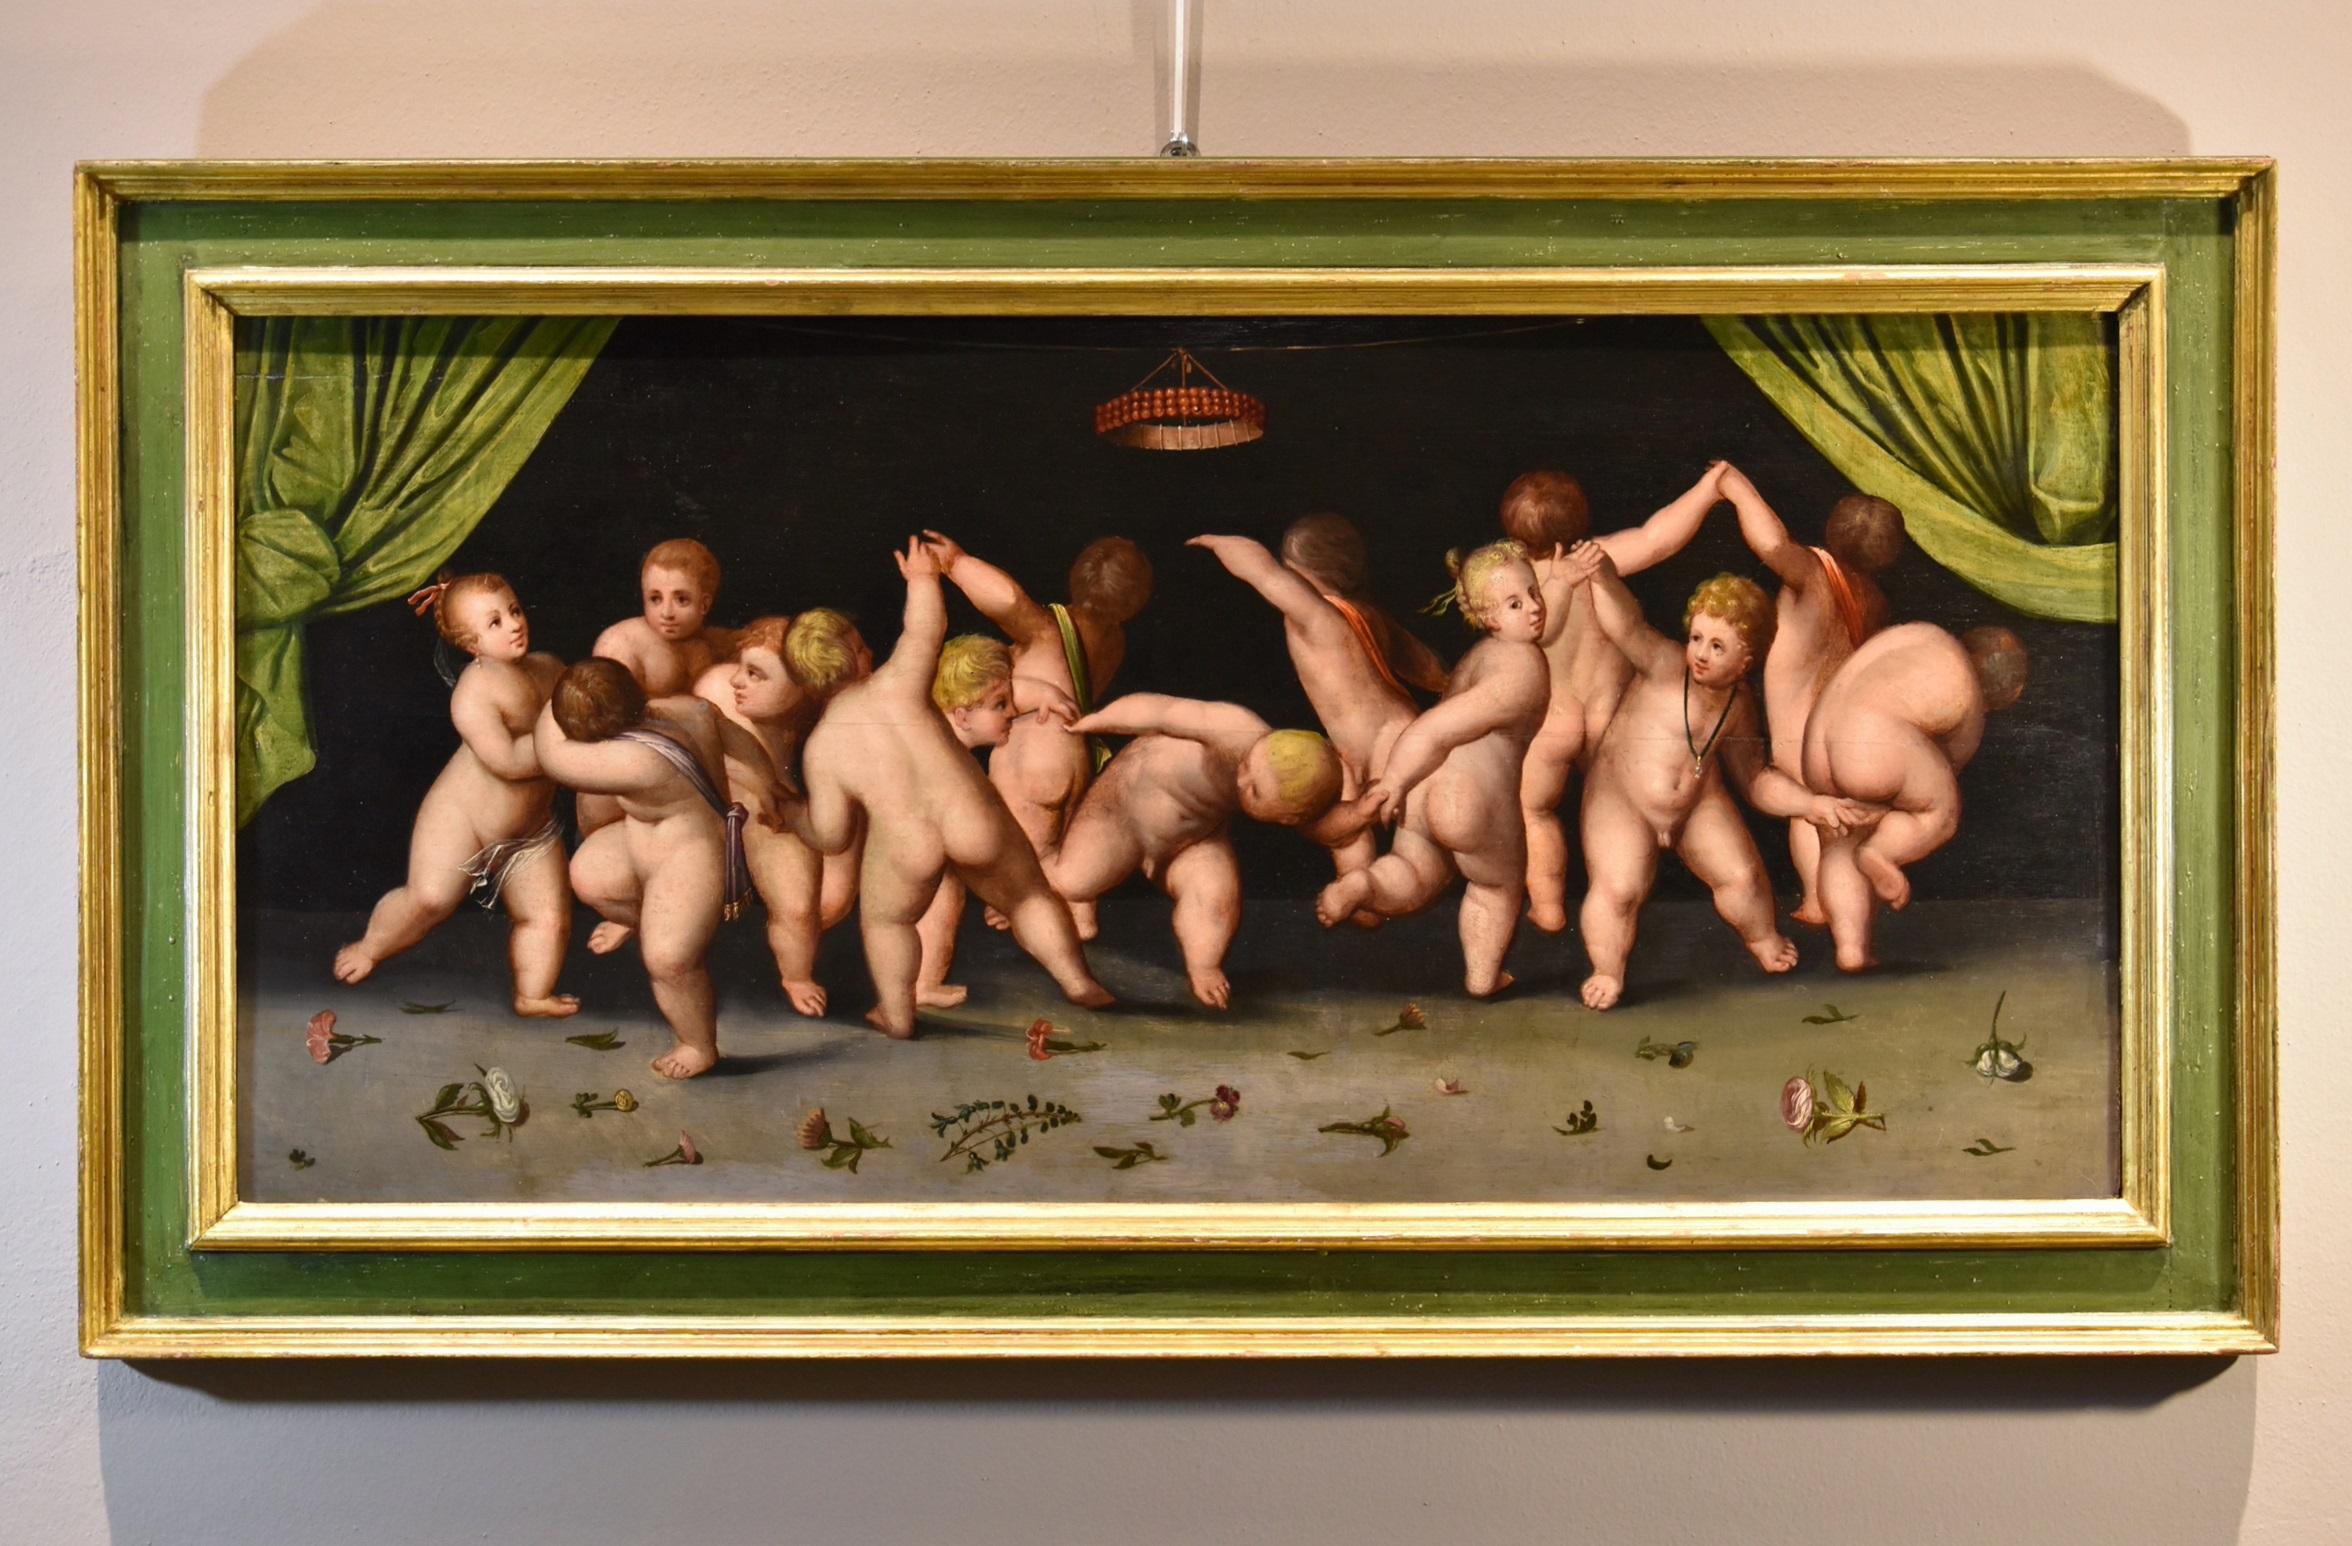 Dance Putti Van Cleve Paint Oil on table 16th Century Flemish Old master Belgium - Old Masters Painting by Cornelis Van Cleve (antwerp, 1520 - 1567) 